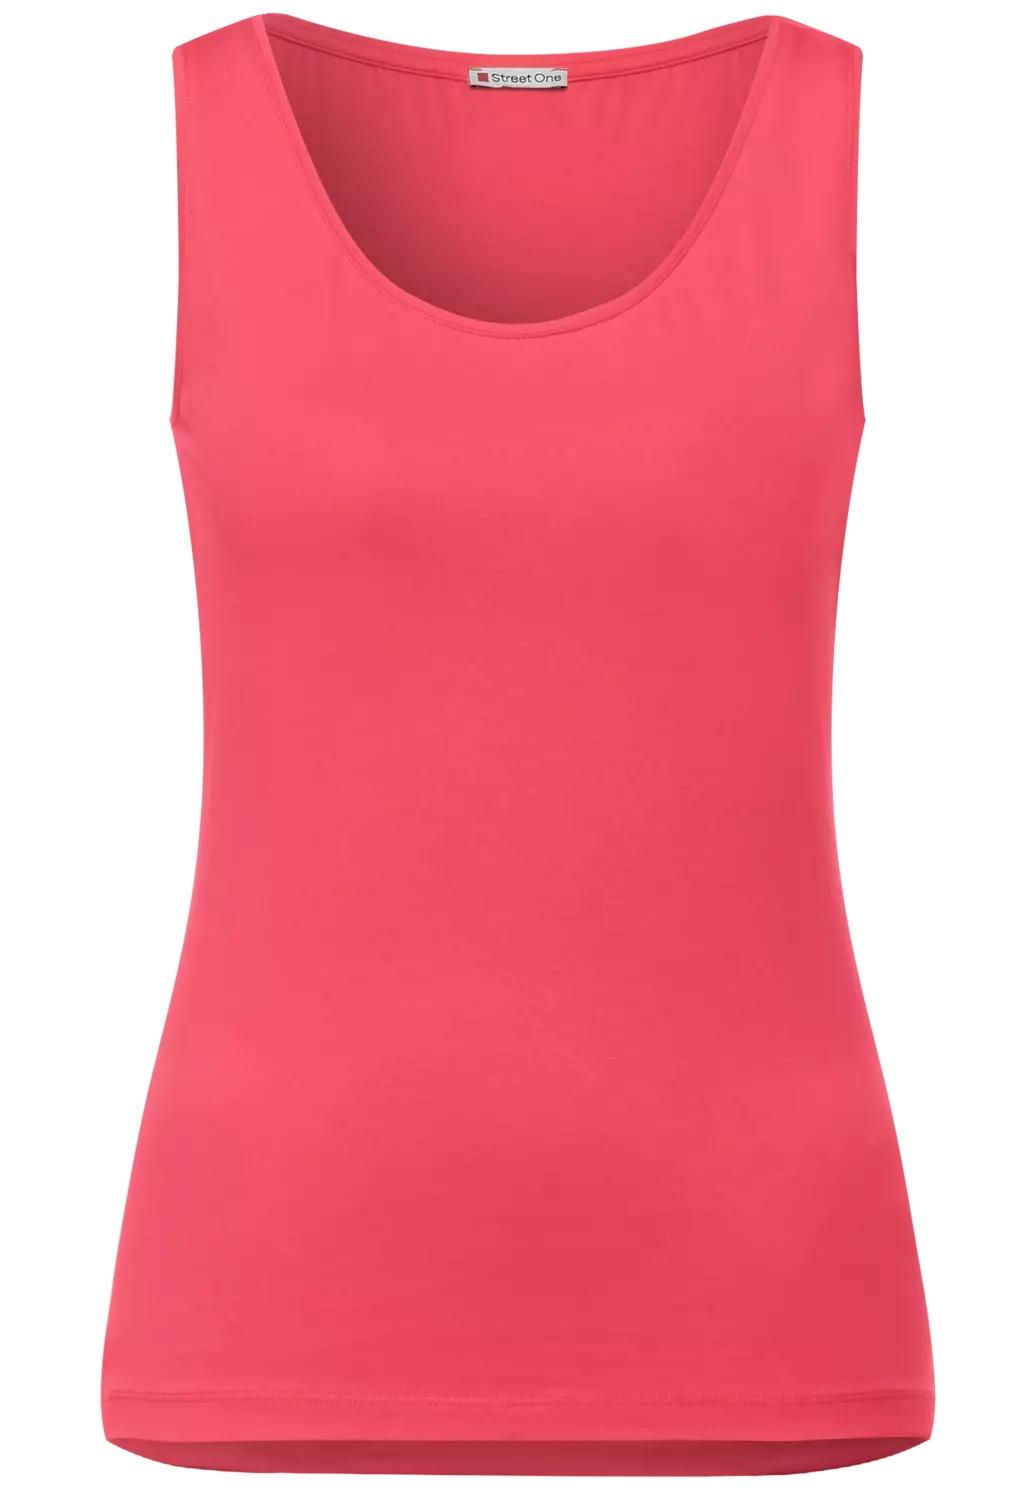 Street One top ANNI, coral